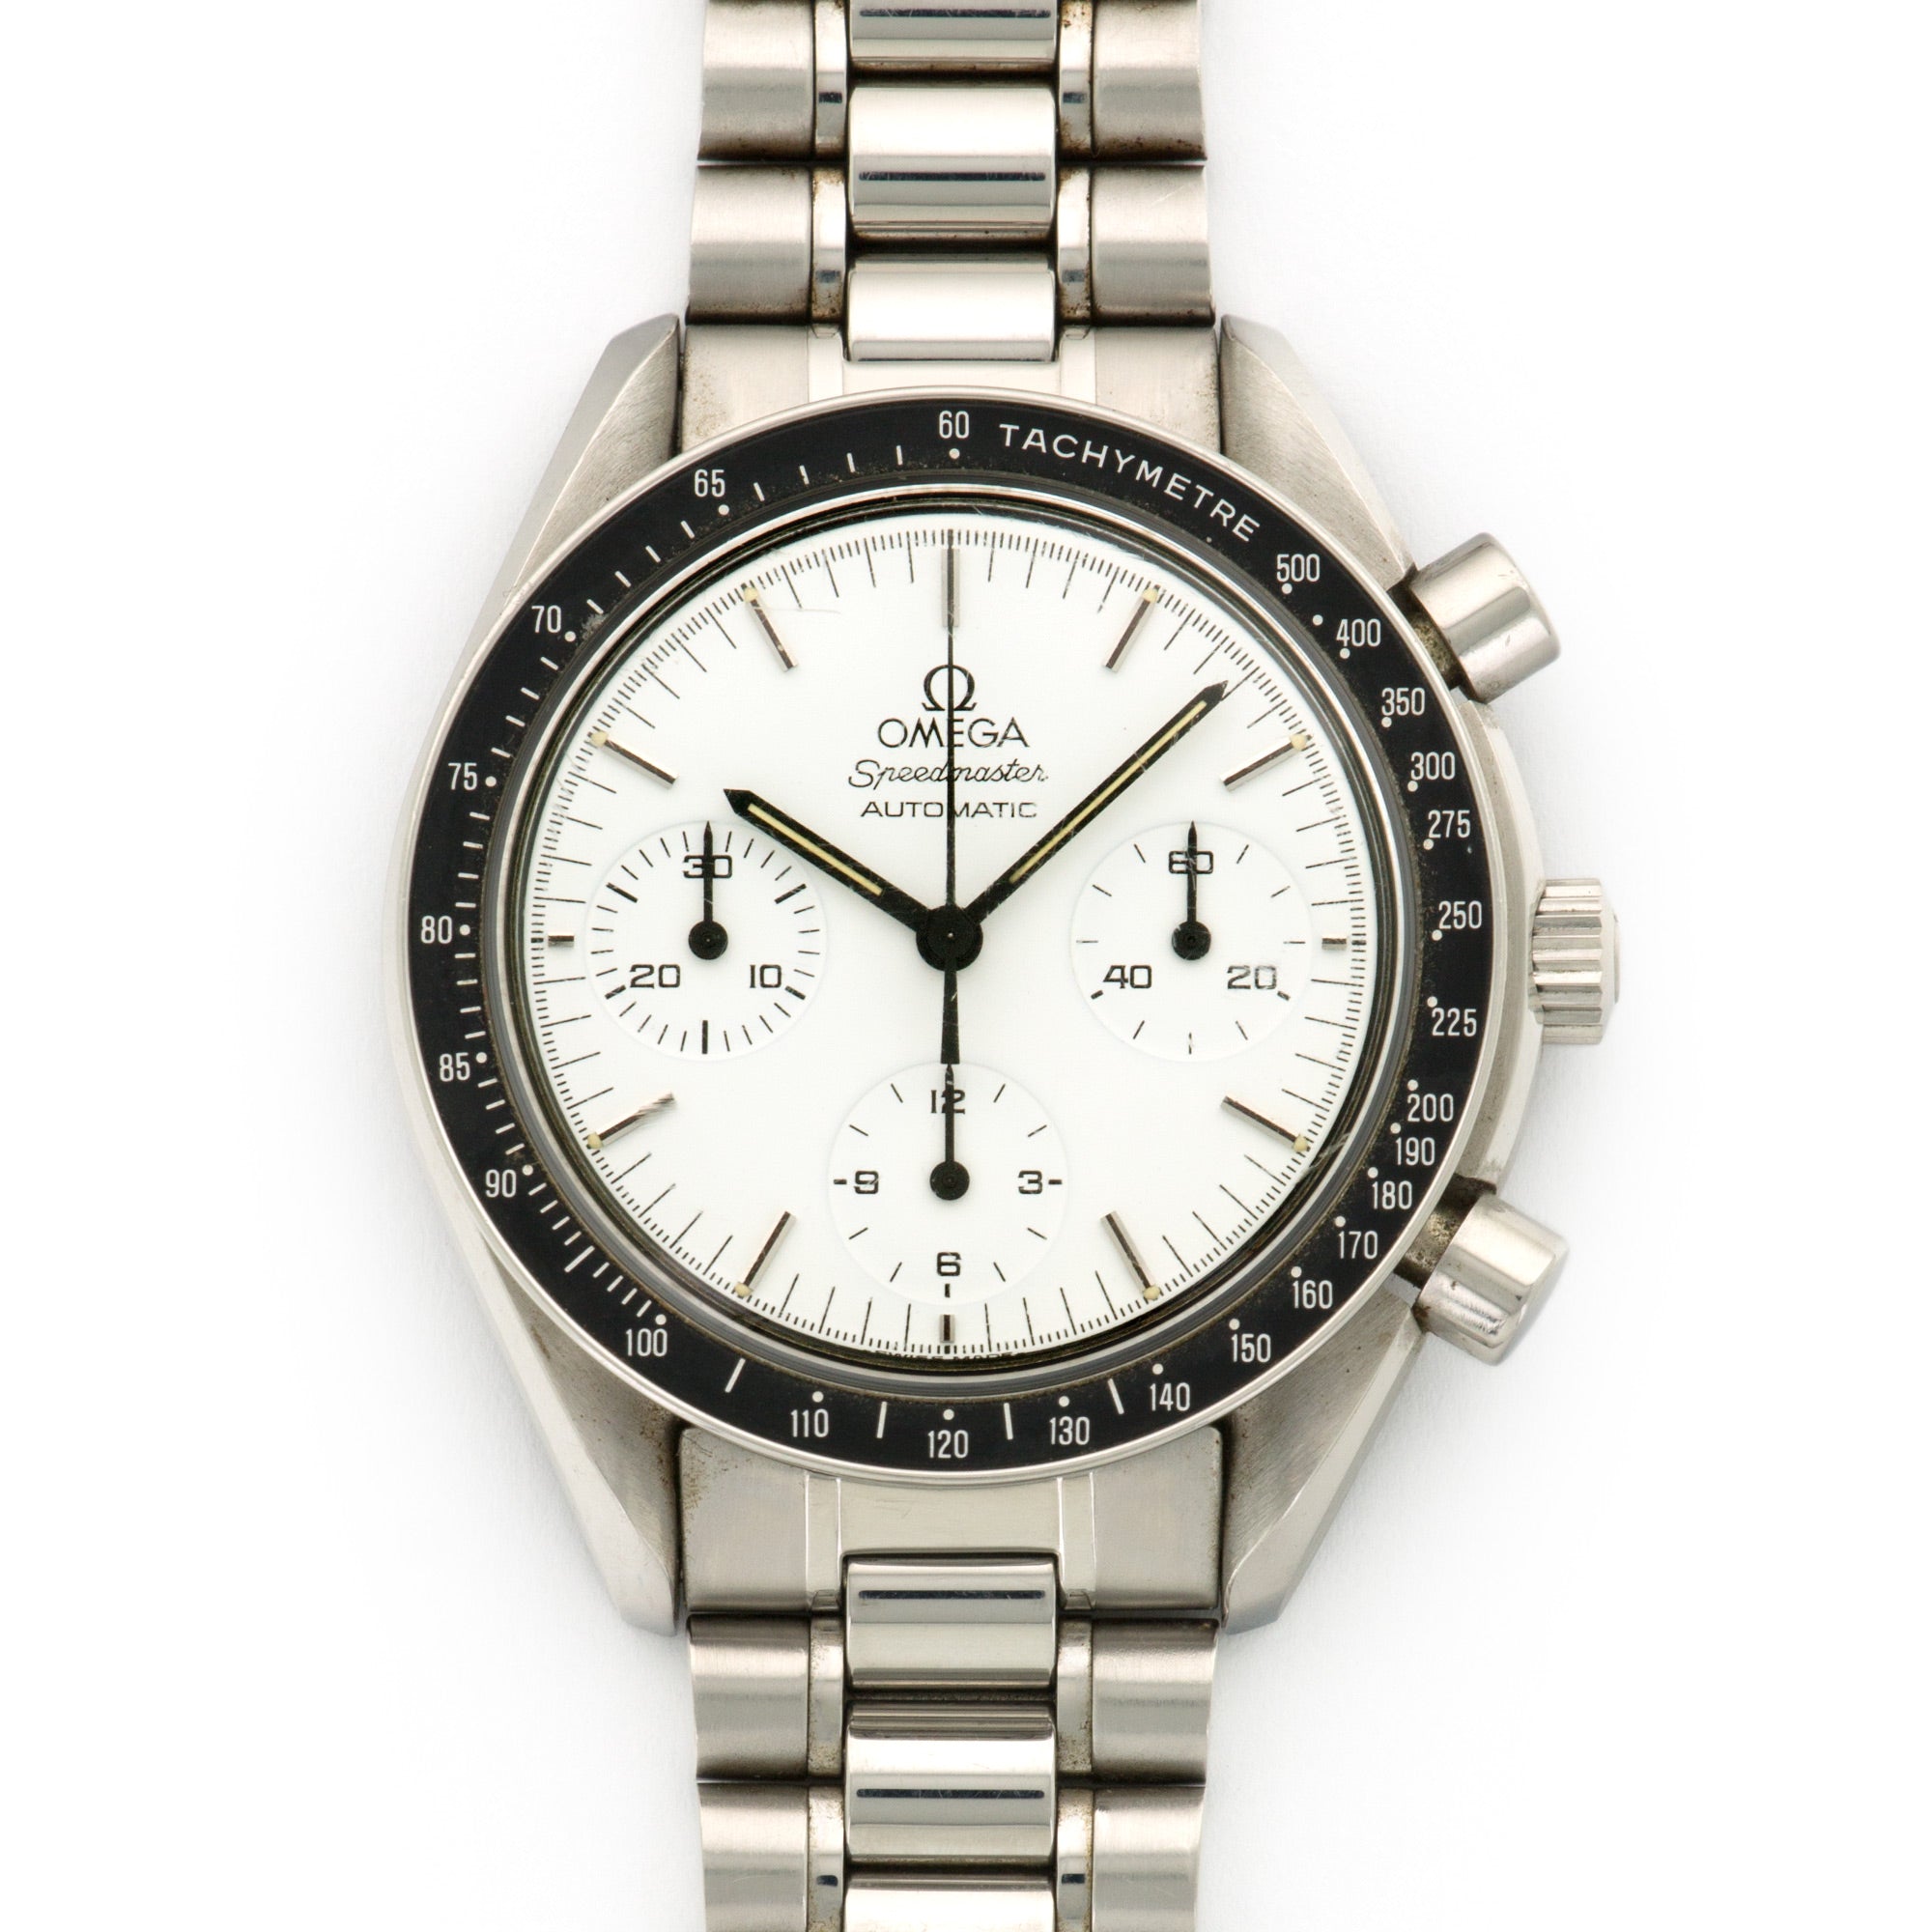 Omega - Omega Speedmaster White Dial Watch Ref. 3810.20 - The Keystone Watches